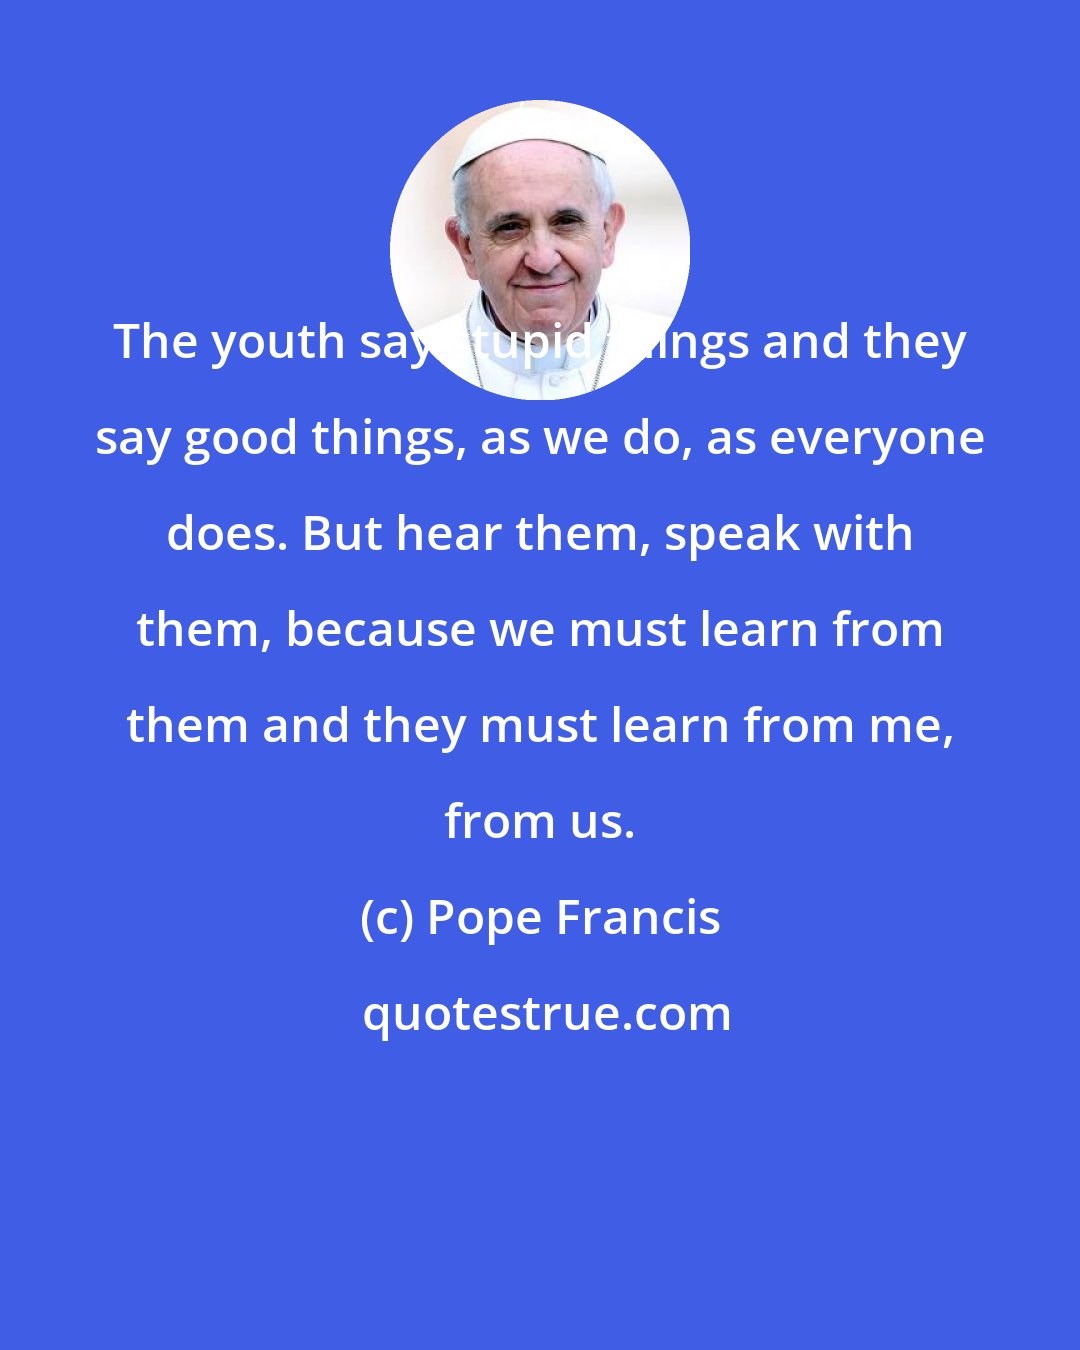 Pope Francis: The youth say stupid things and they say good things, as we do, as everyone does. But hear them, speak with them, because we must learn from them and they must learn from me, from us.